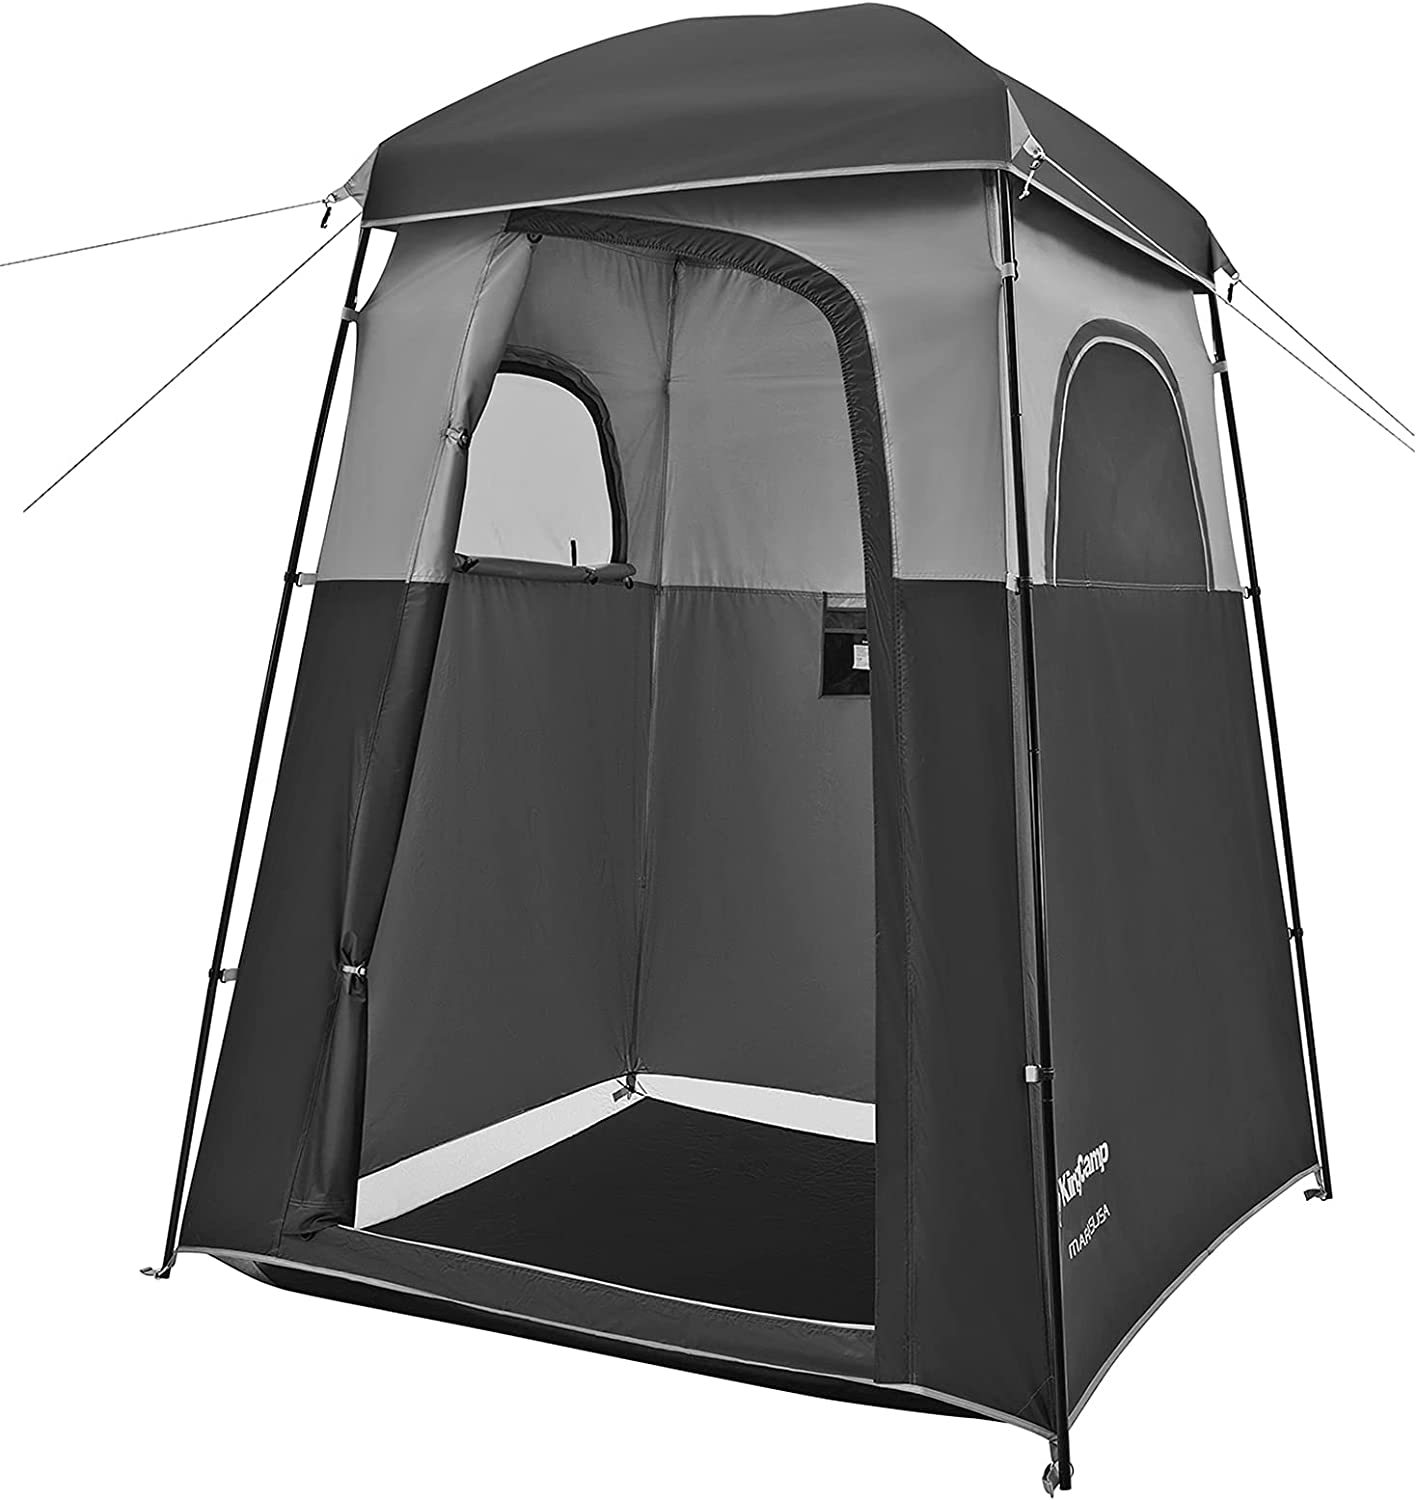 Primary image for Kingcamp Oversized Space Privacy Shower Tent Portable Outdoor Shower Tents For